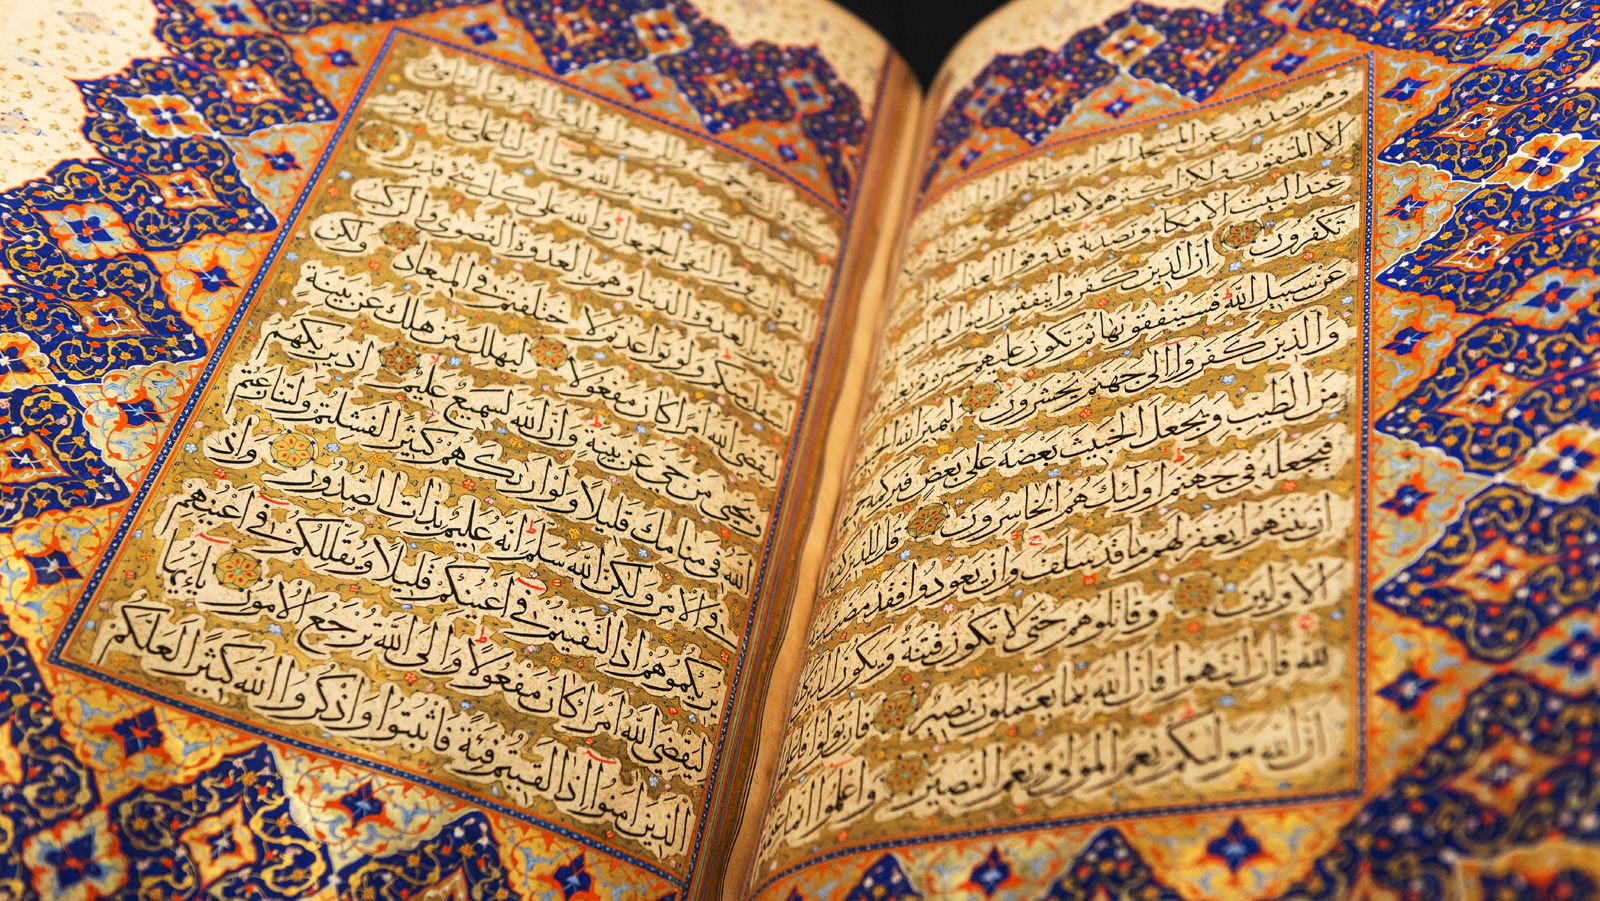 Let’s Examine Our Relationship with the Qur'an - IslamiCity